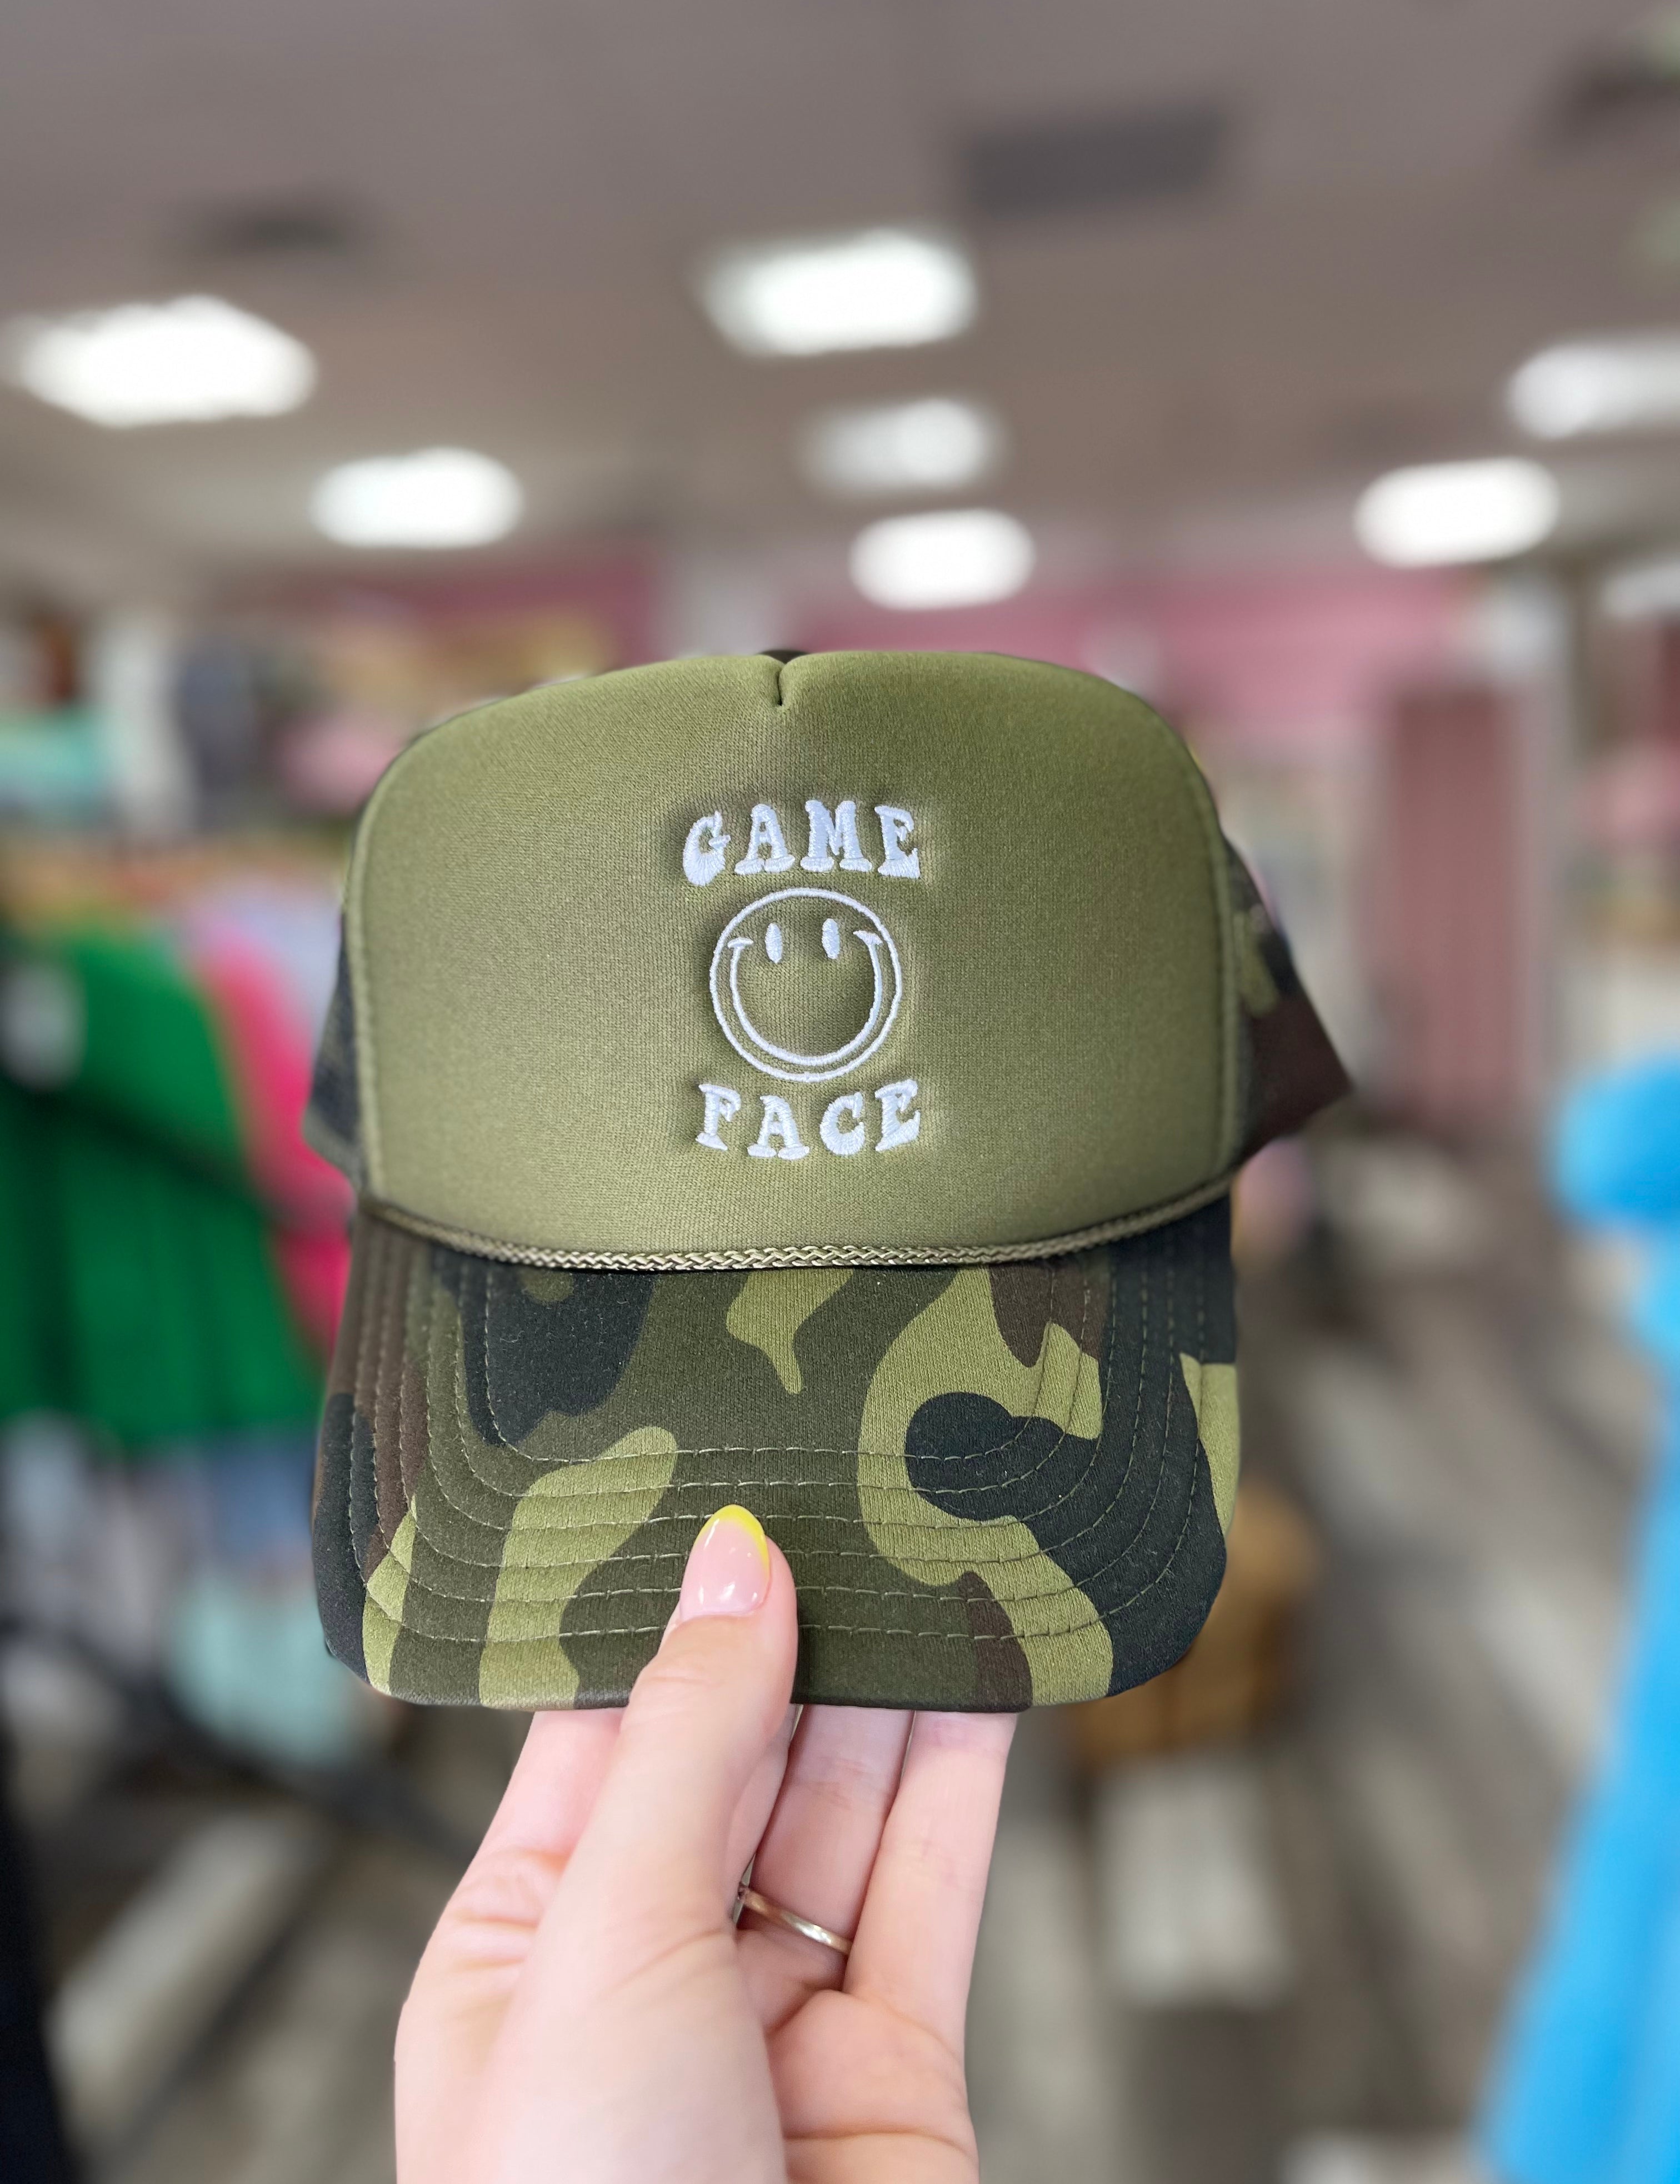 Game Face Trucker Hat